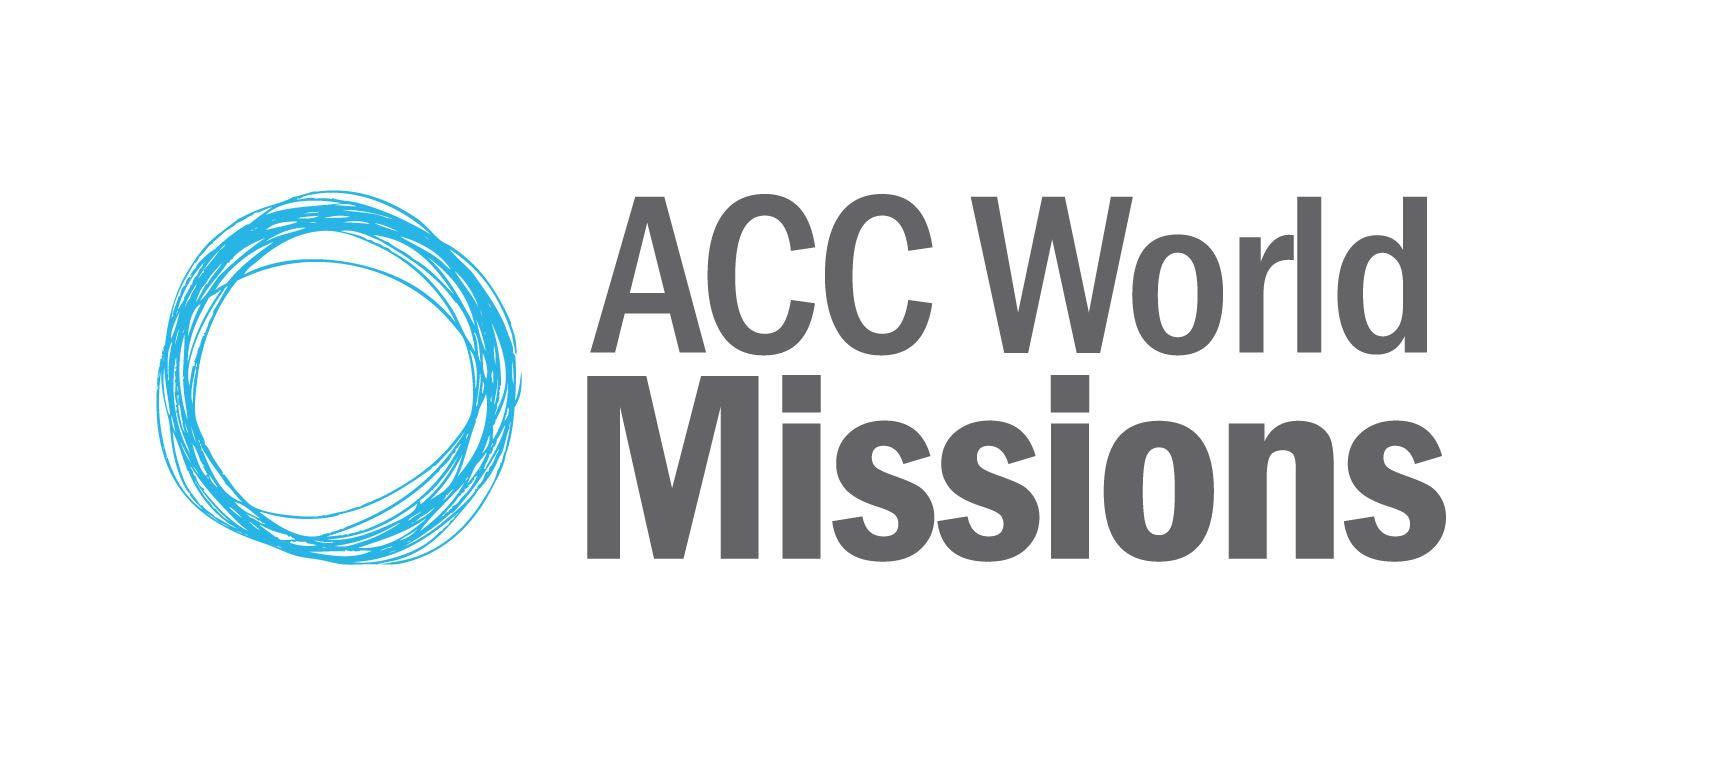 Red Knot Logo - Non-profit Logo Design for ACC World Missions by Red Knot Design ...